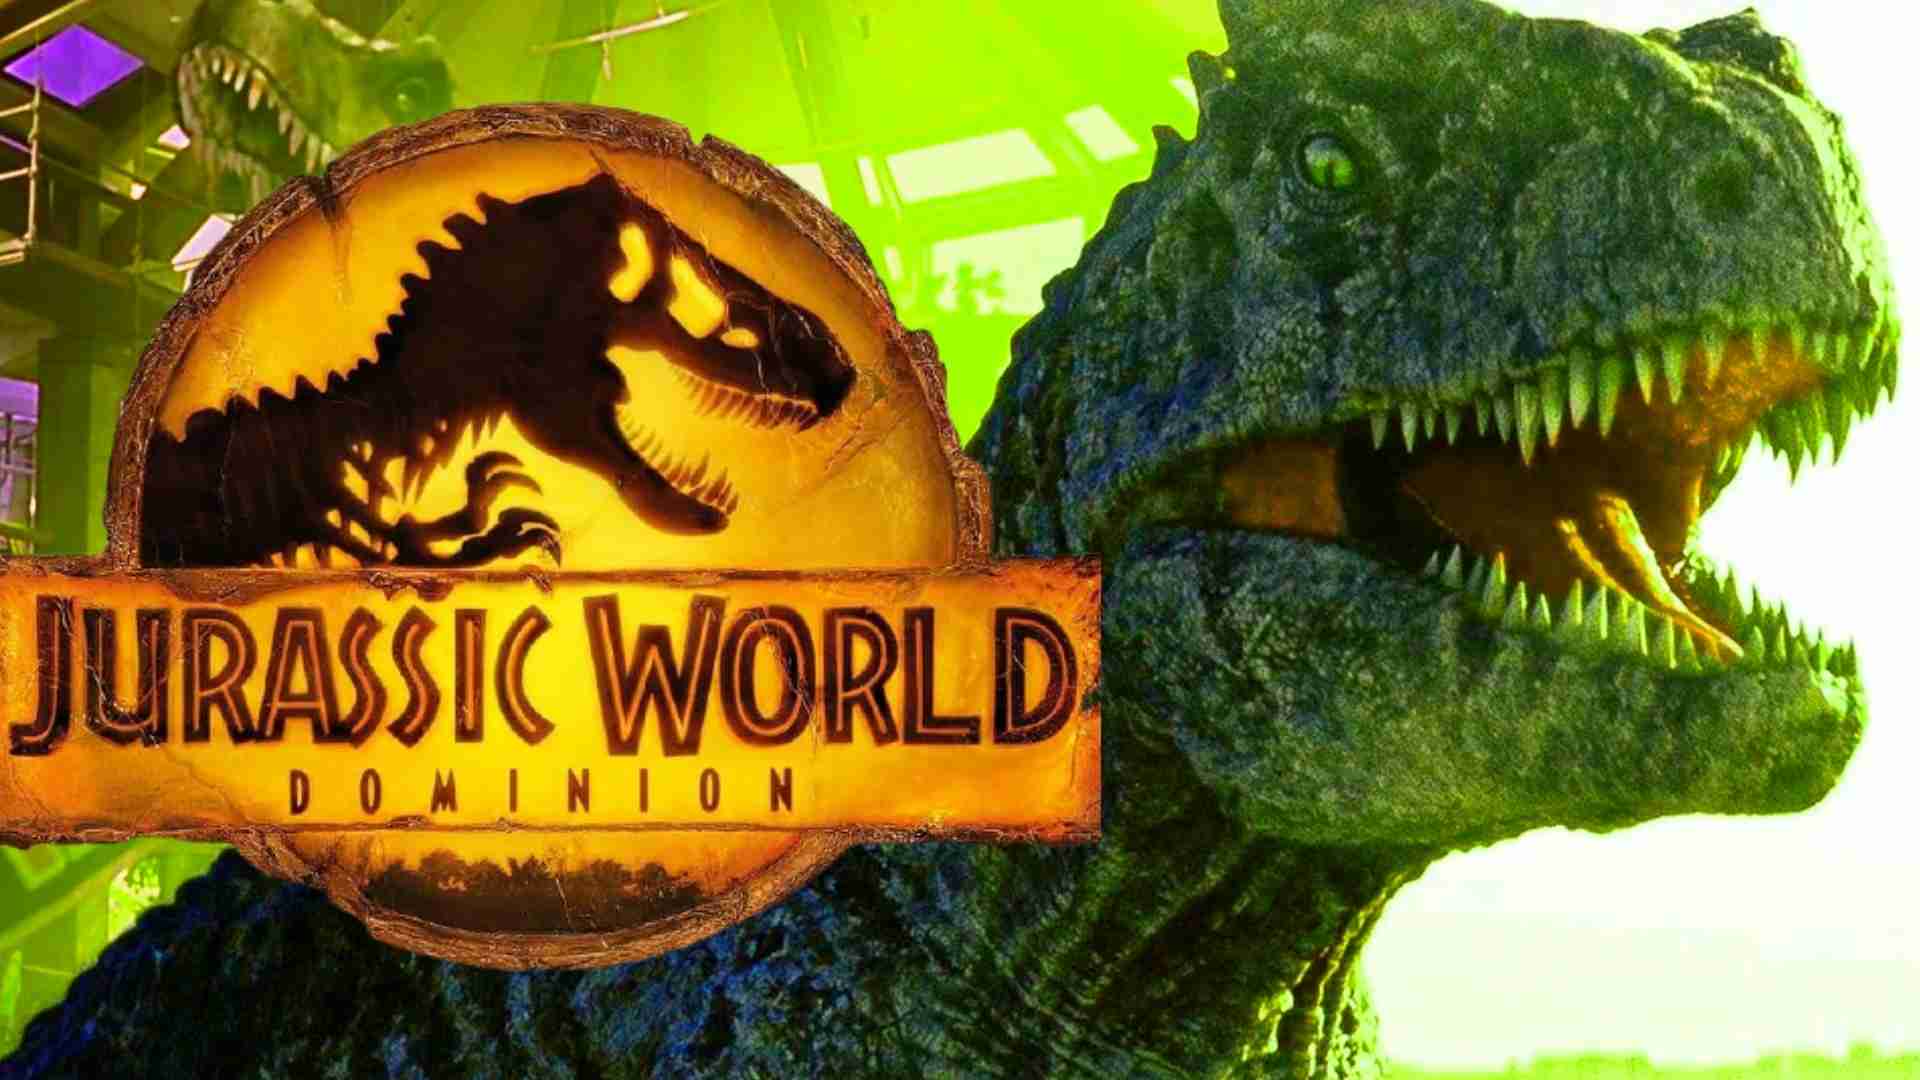 Jurassic World Dominion Parents Guide and age rating | 2022